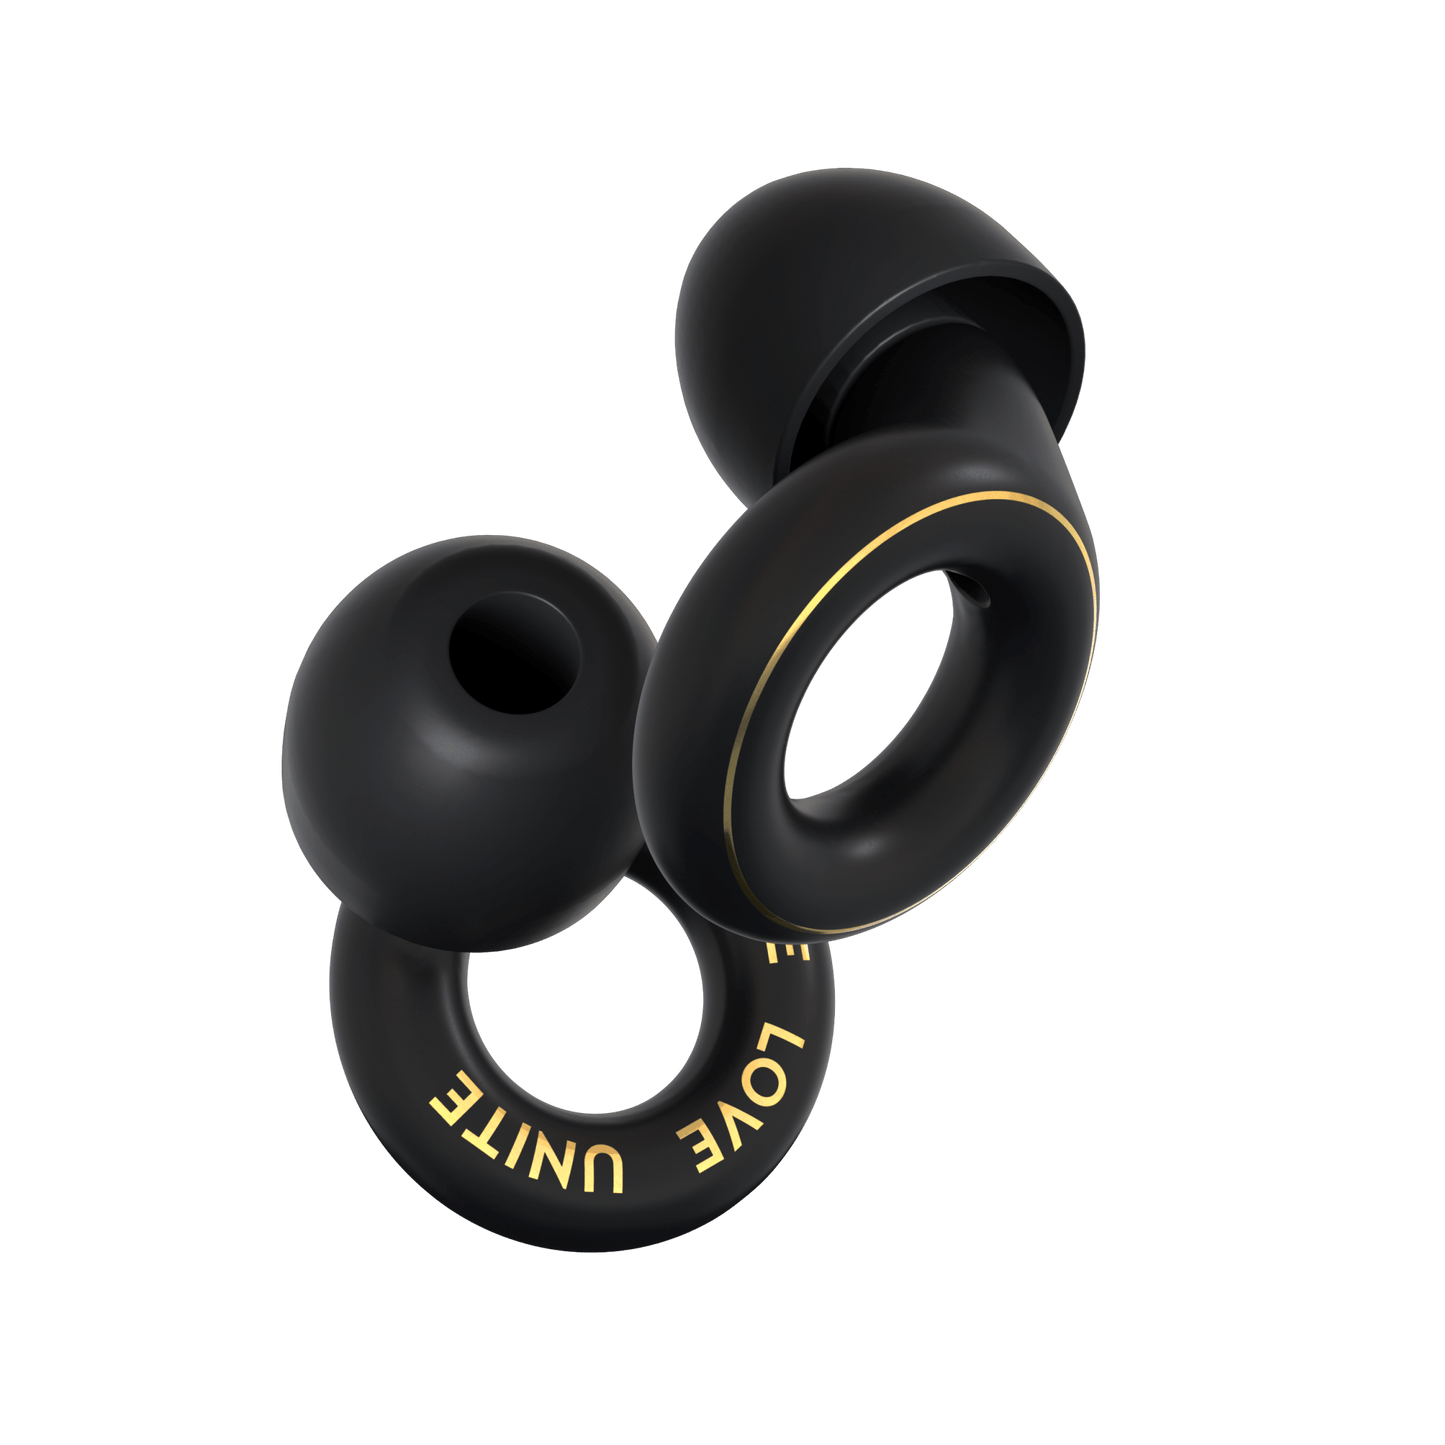 Tomorrowland Partners With Loop Earplugs for Festival's Love Tomorrow  Initiative -  - The Latest Electronic Dance Music News, Reviews &  Artists